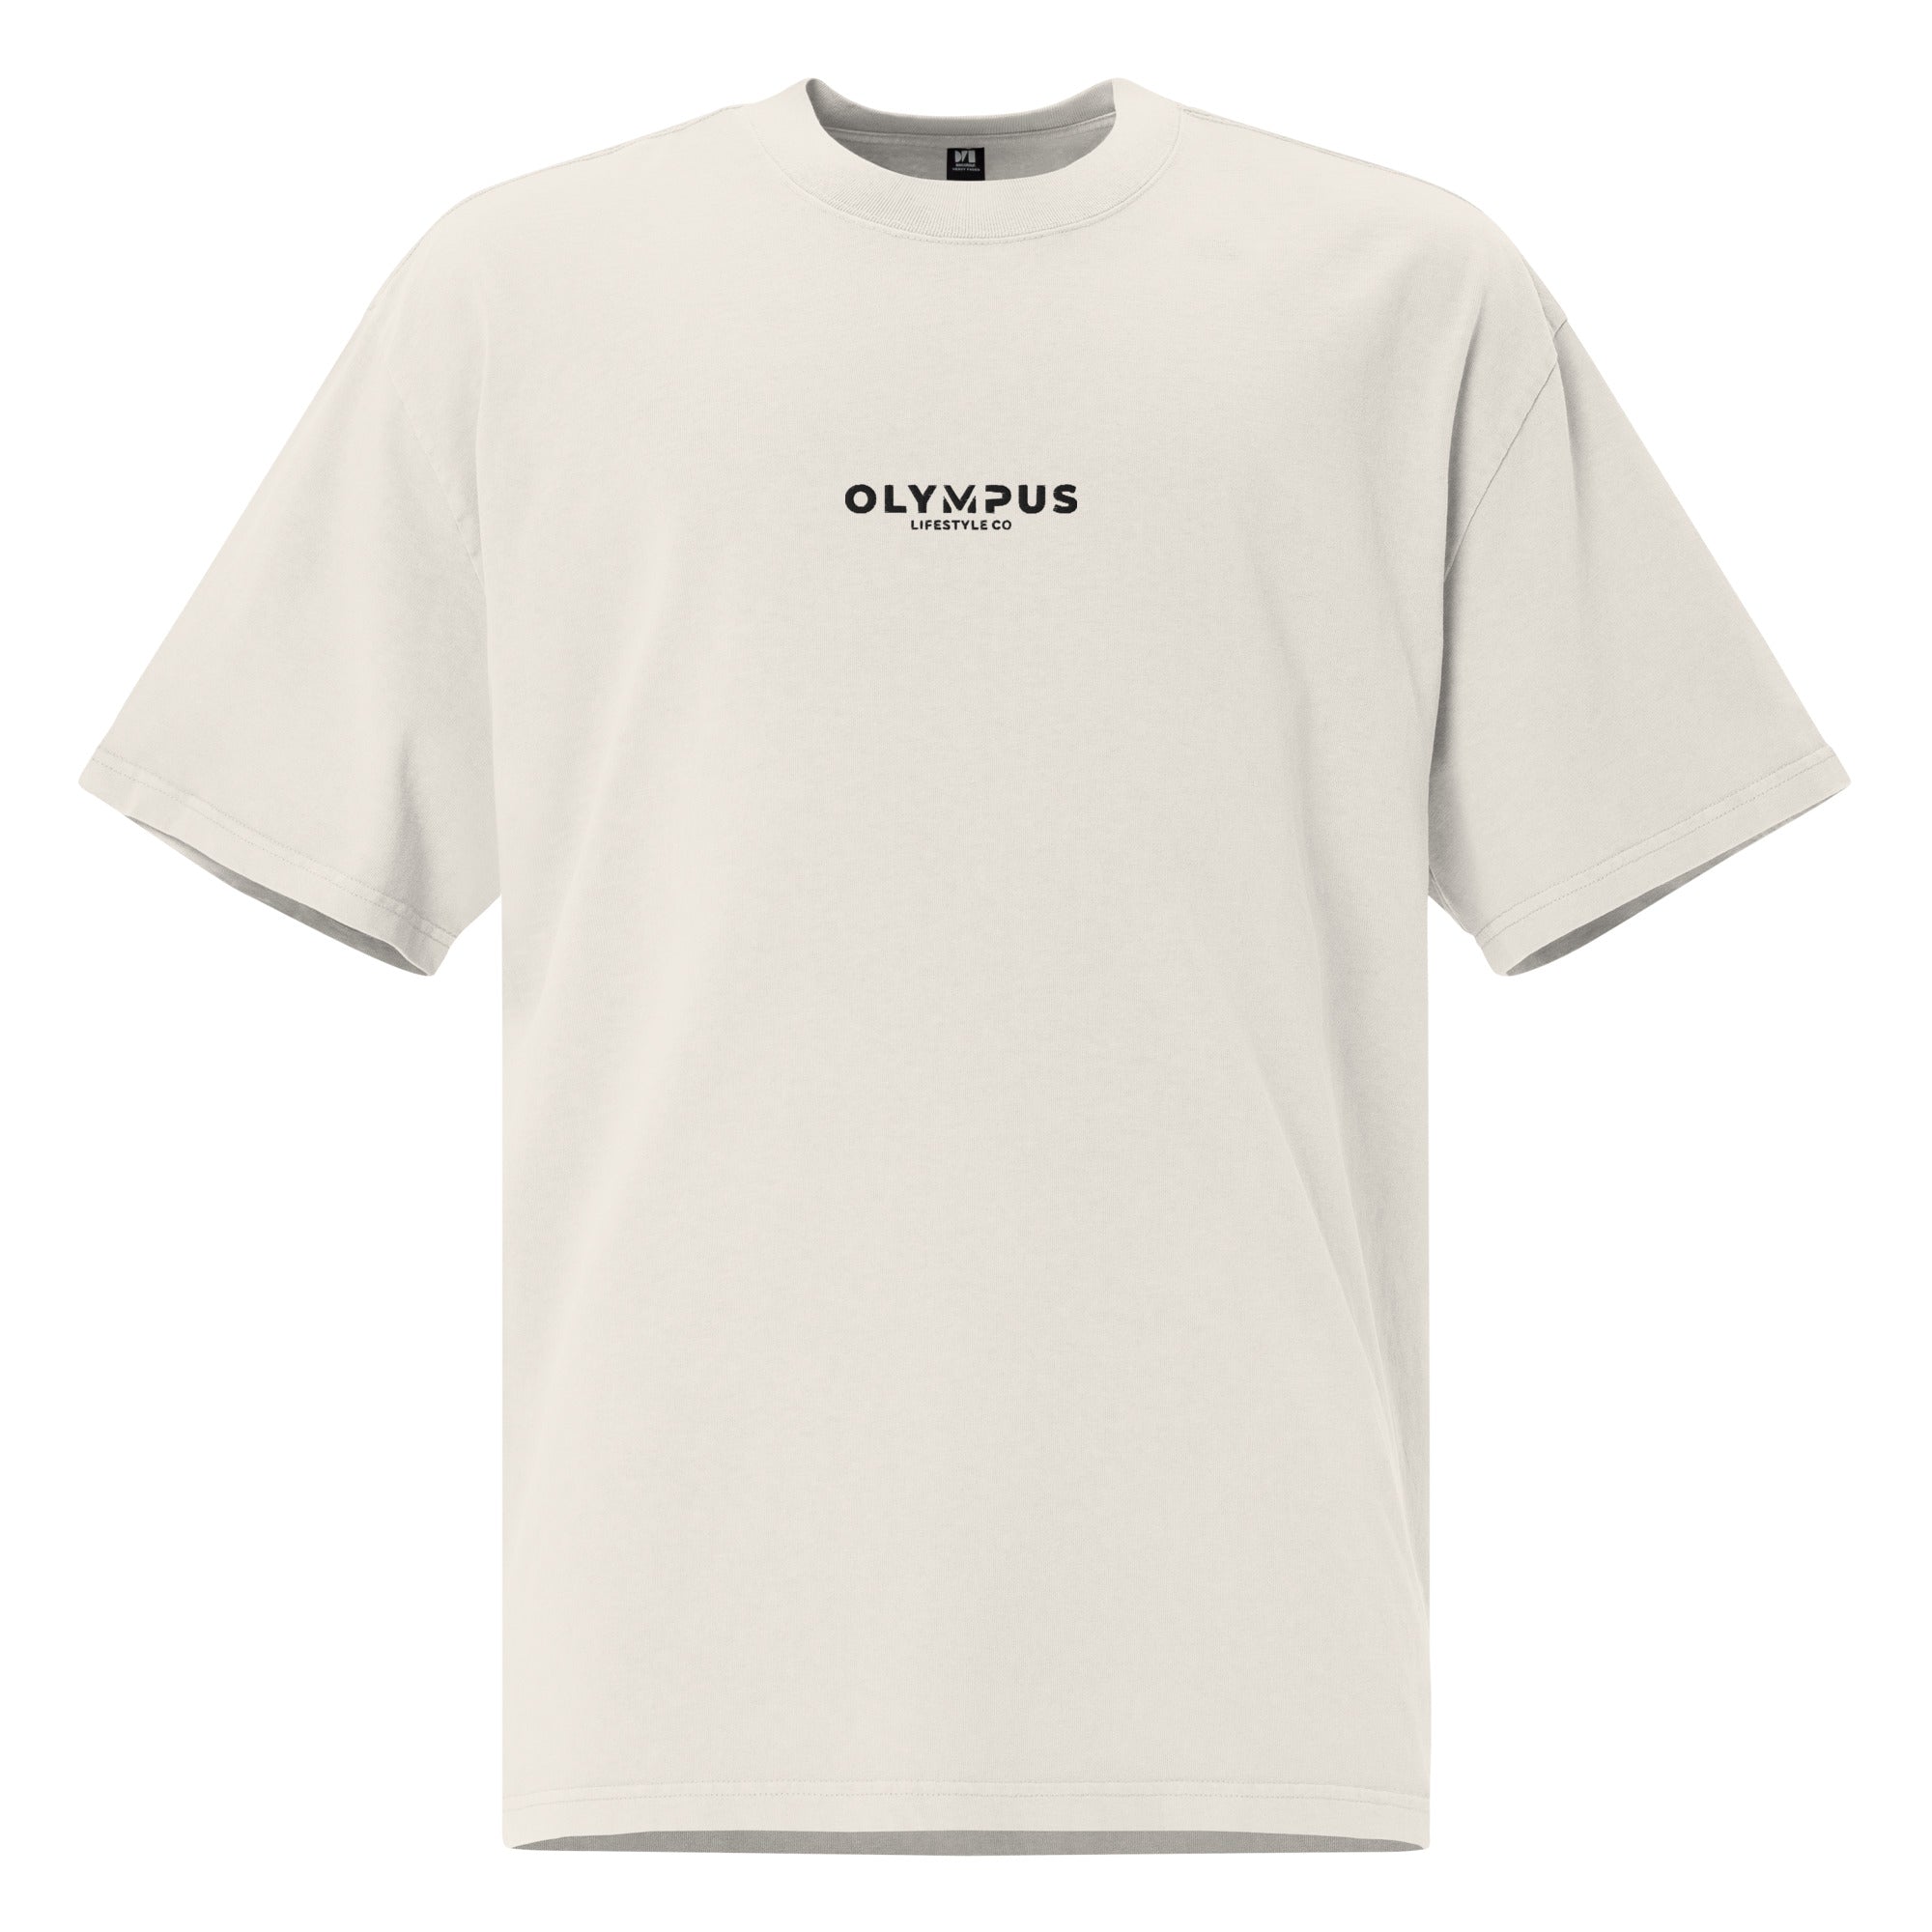 Olympus Men's Embroidered Oversized T-Shirt Black Text Logo